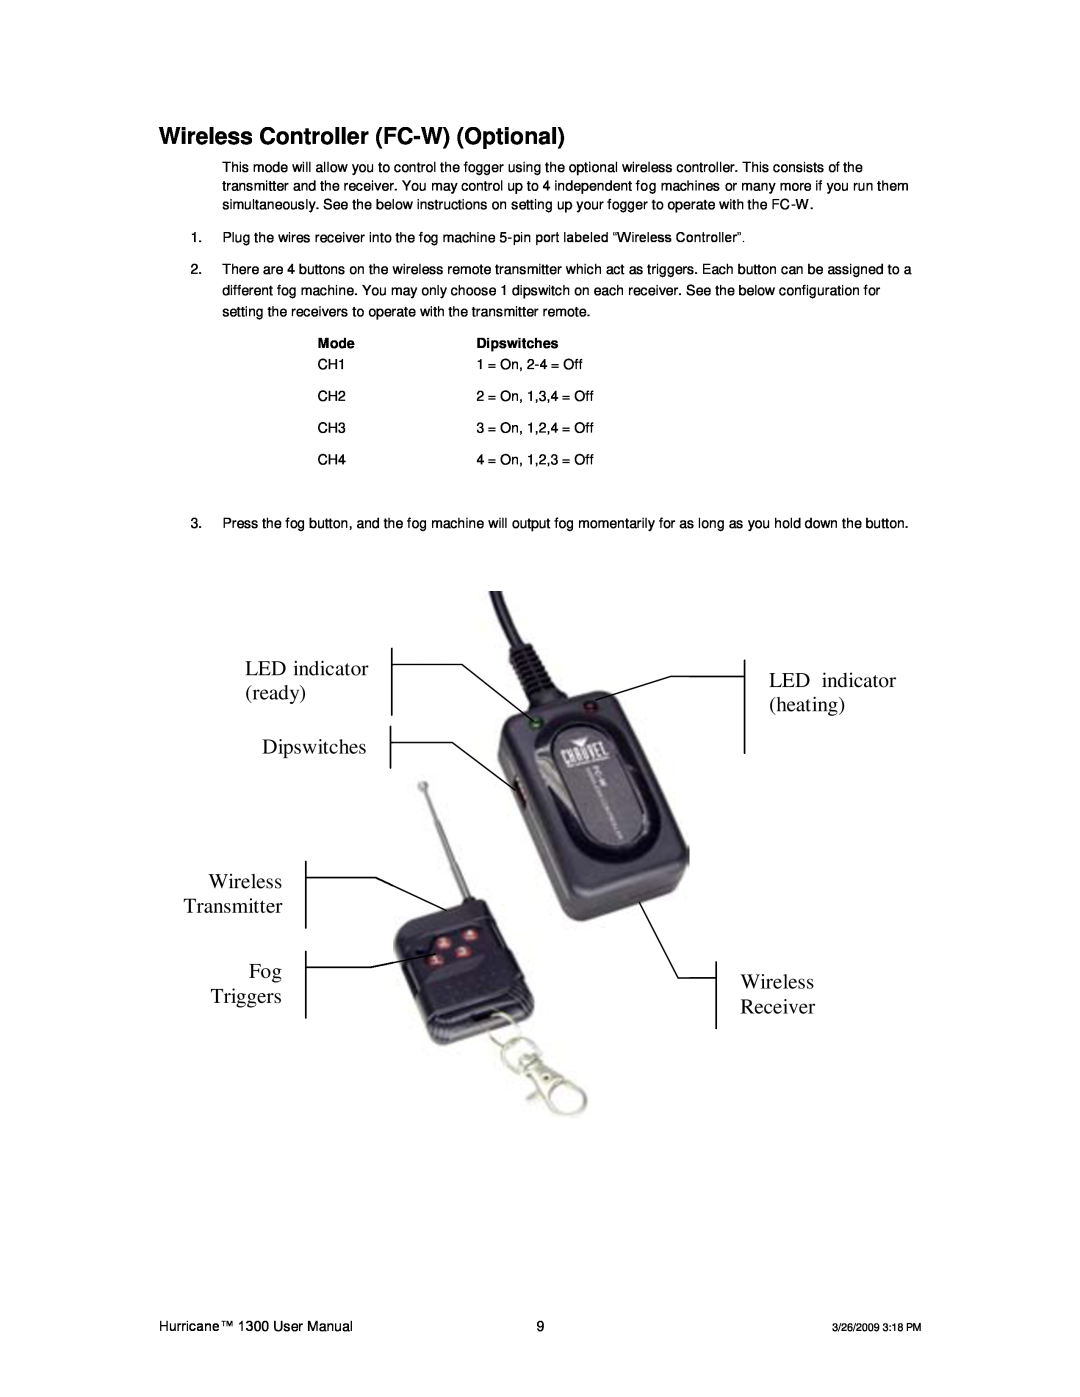 Chauvet Hurricane 1300 user manual Wireless Controller FC-W Optional, LED indicator heating Wireless Receiver, Mode 